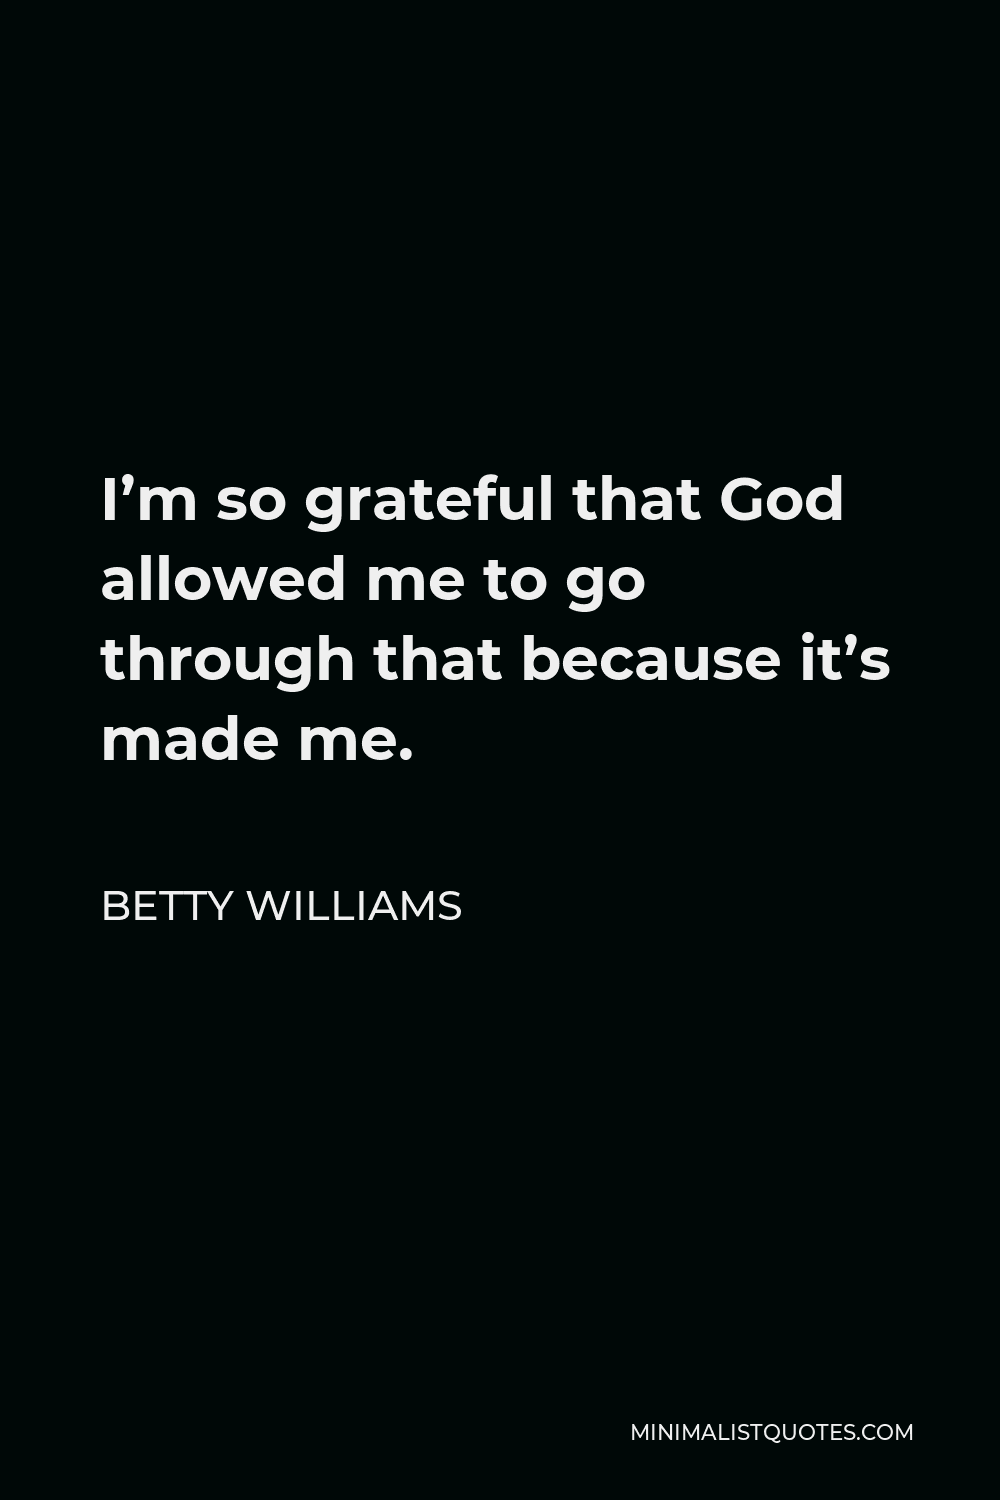 Betty Williams Quote - I’m so grateful that God allowed me to go through that because it’s made me.